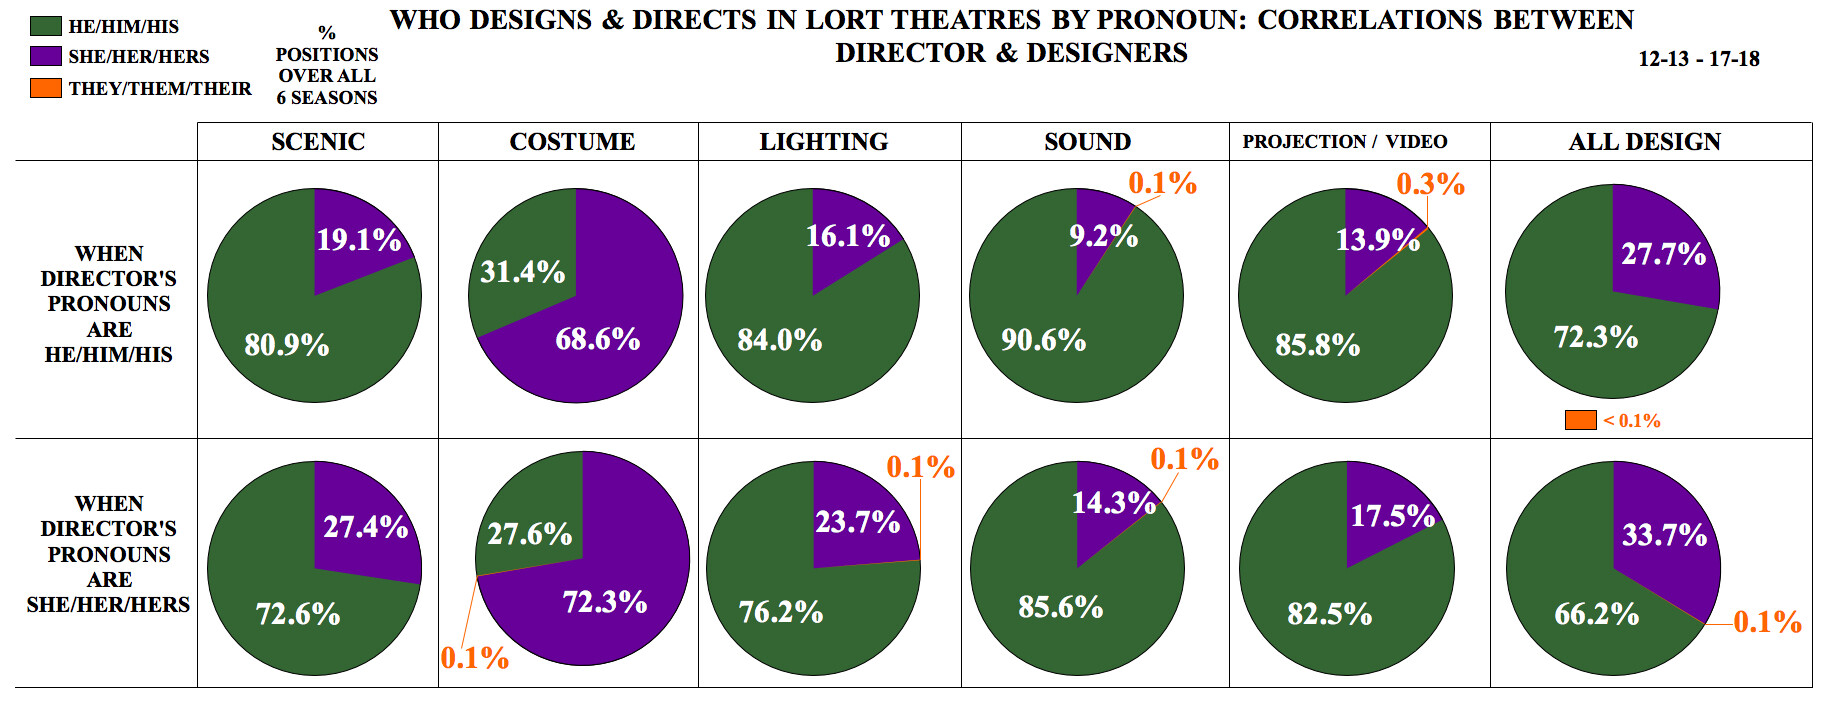 Who Designs & Directs in LORT Theatres by Pronoun: Correlations between Director & Designers